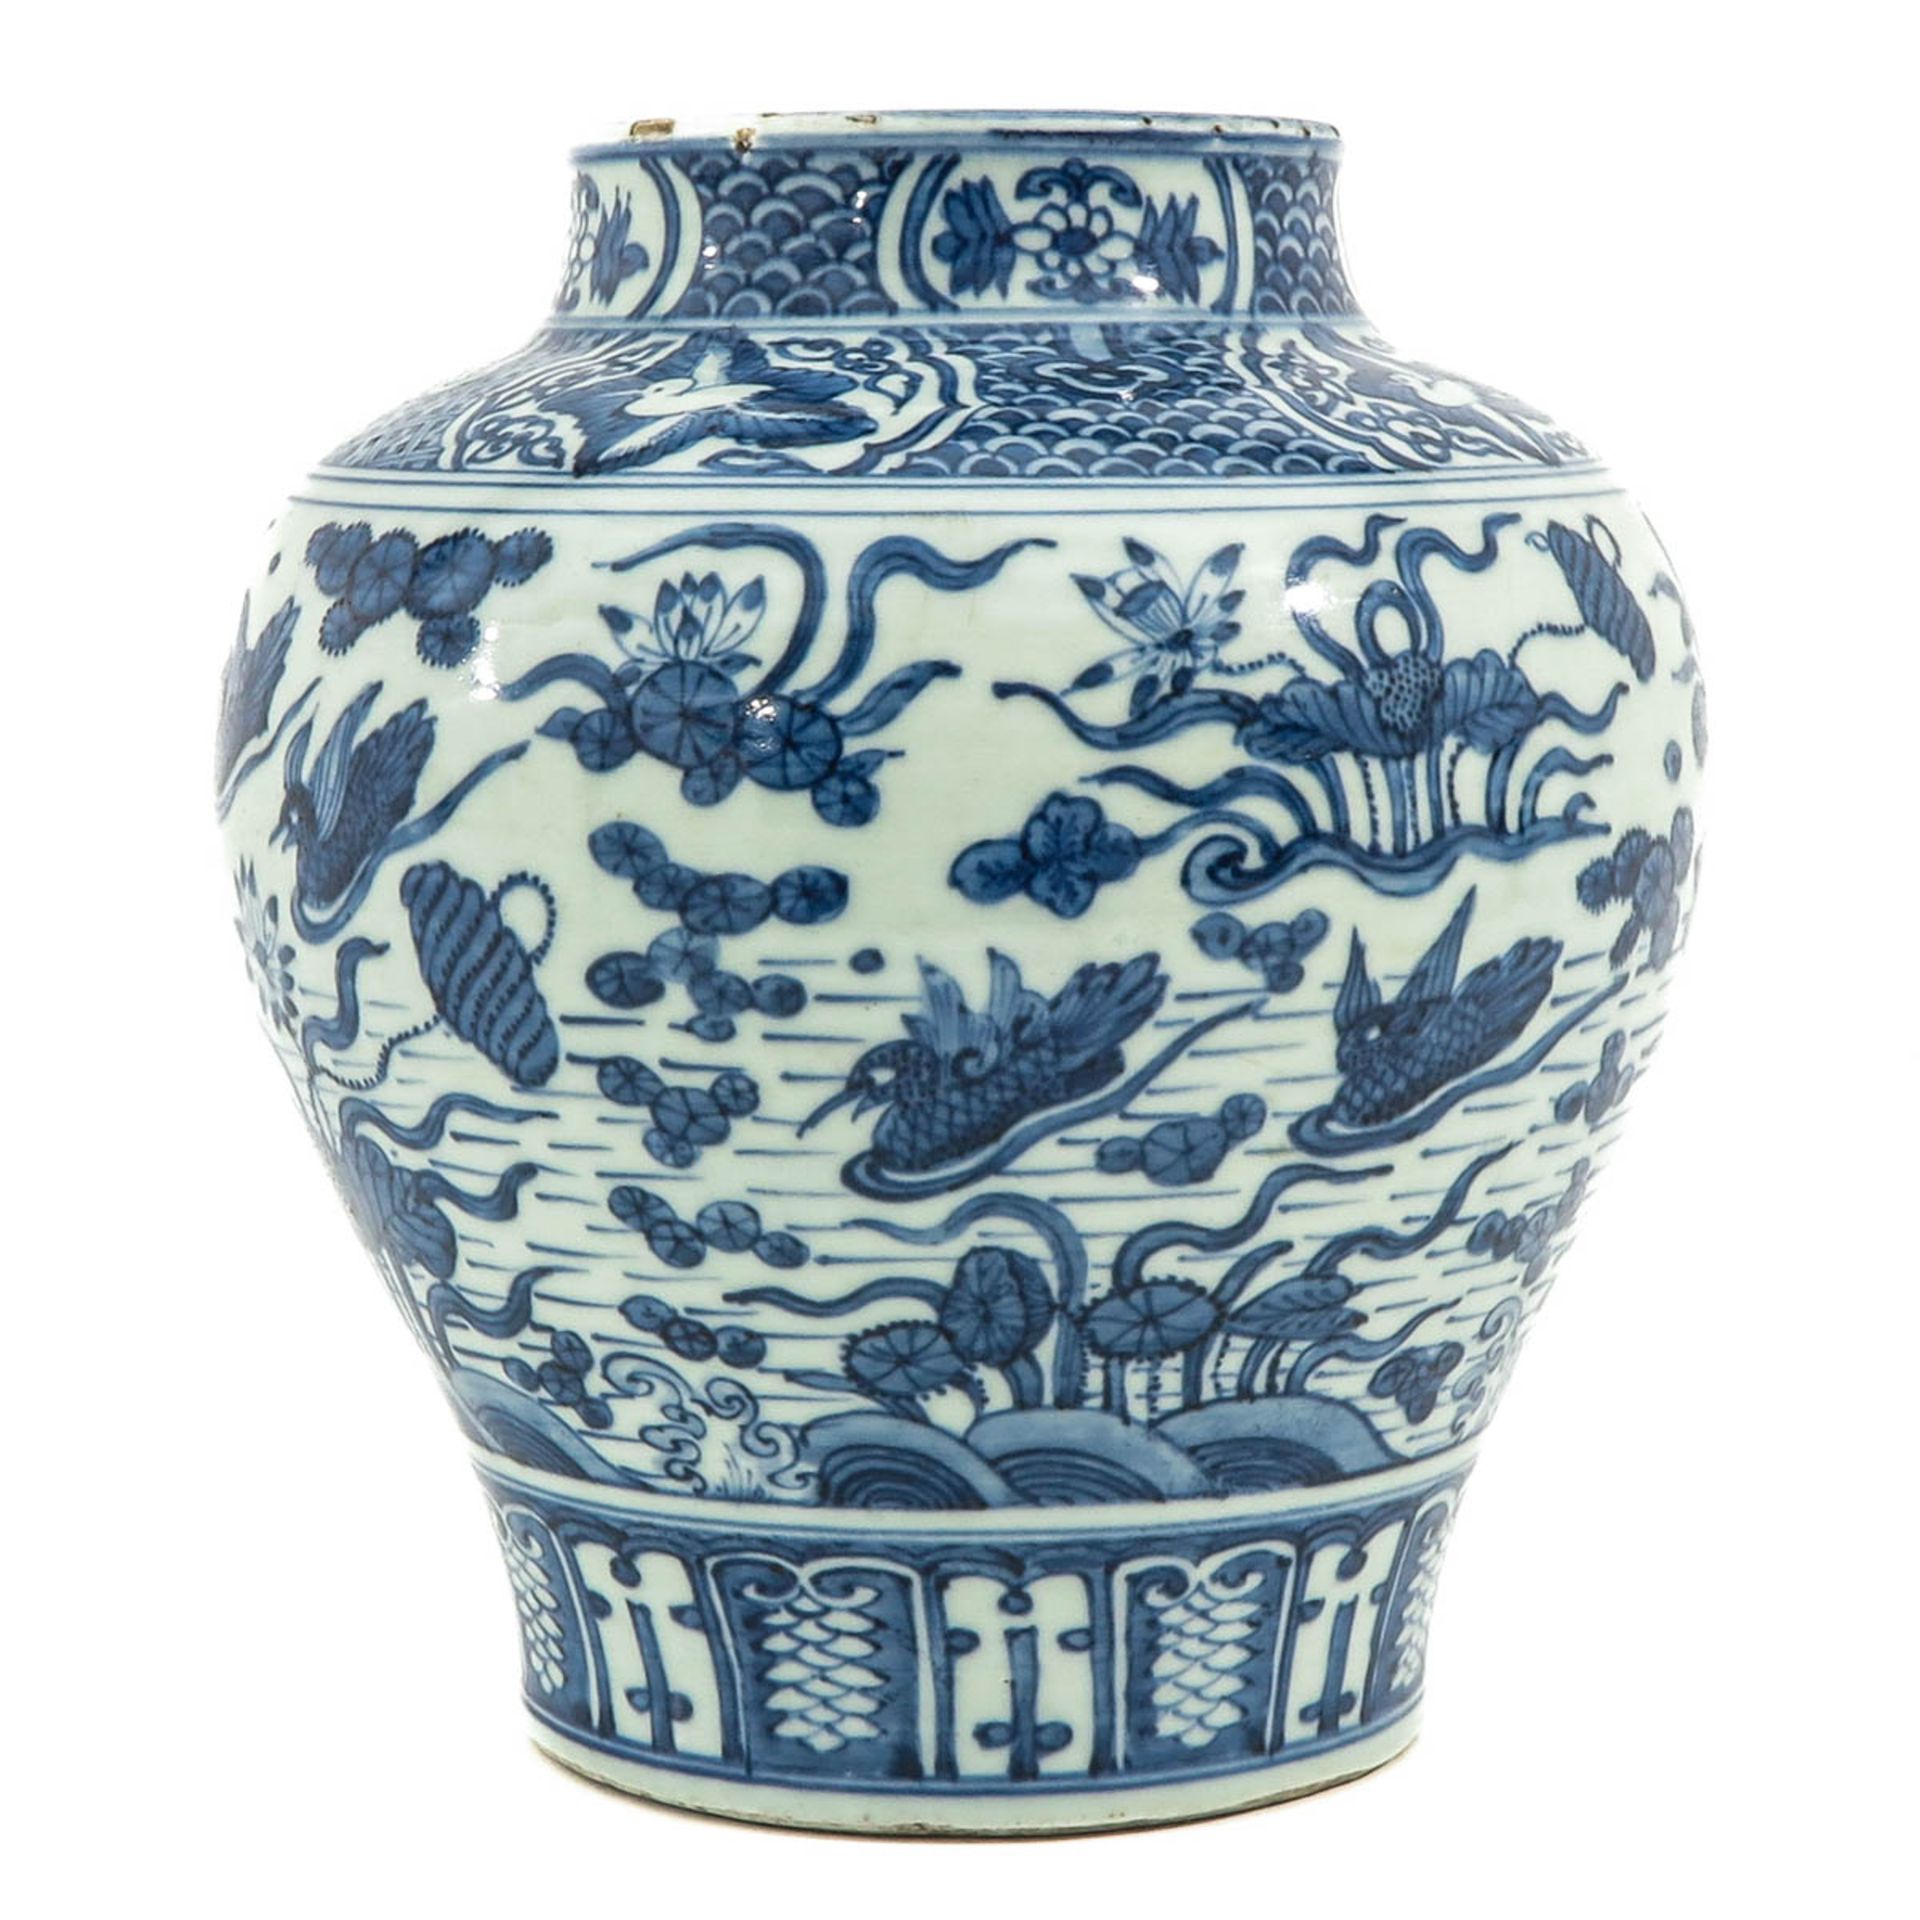 A Blue and White Jar - Image 4 of 9